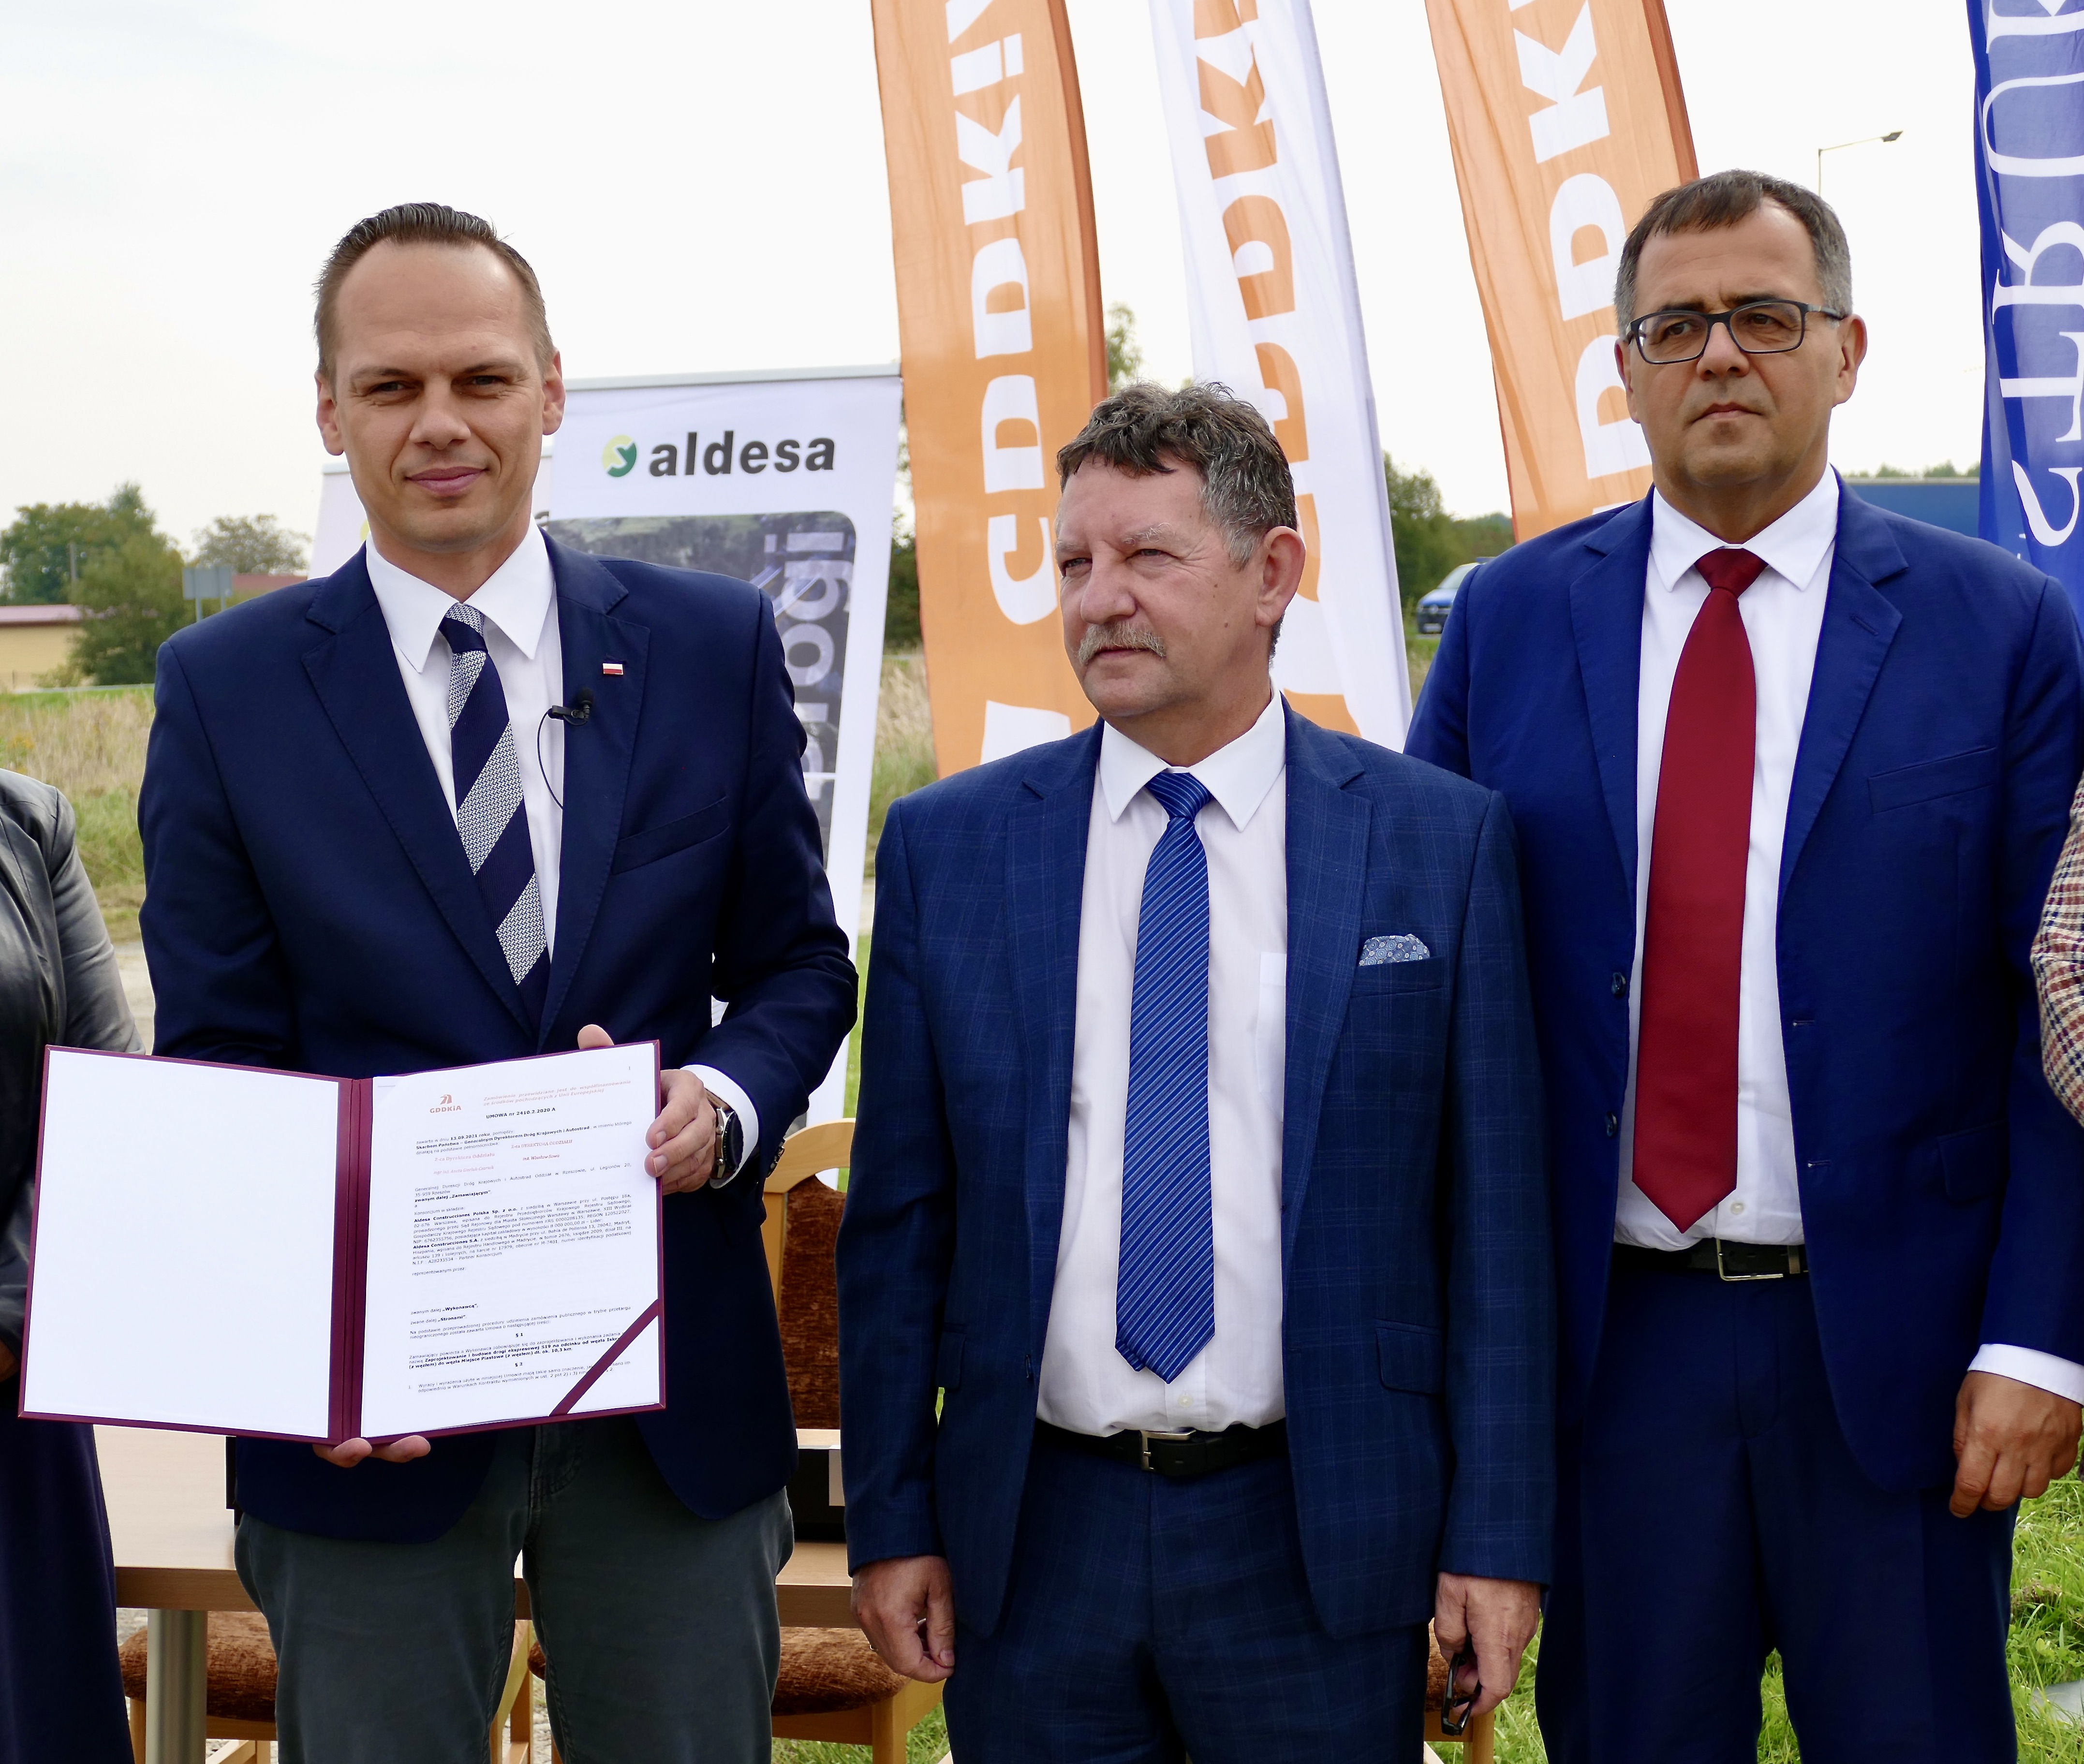 Aldesa - Aldesa signed a contract with the General Directorate for National Roads and Motorways for the construction of the expressway S19 between Iskrzynia and Miejsce Piastowe